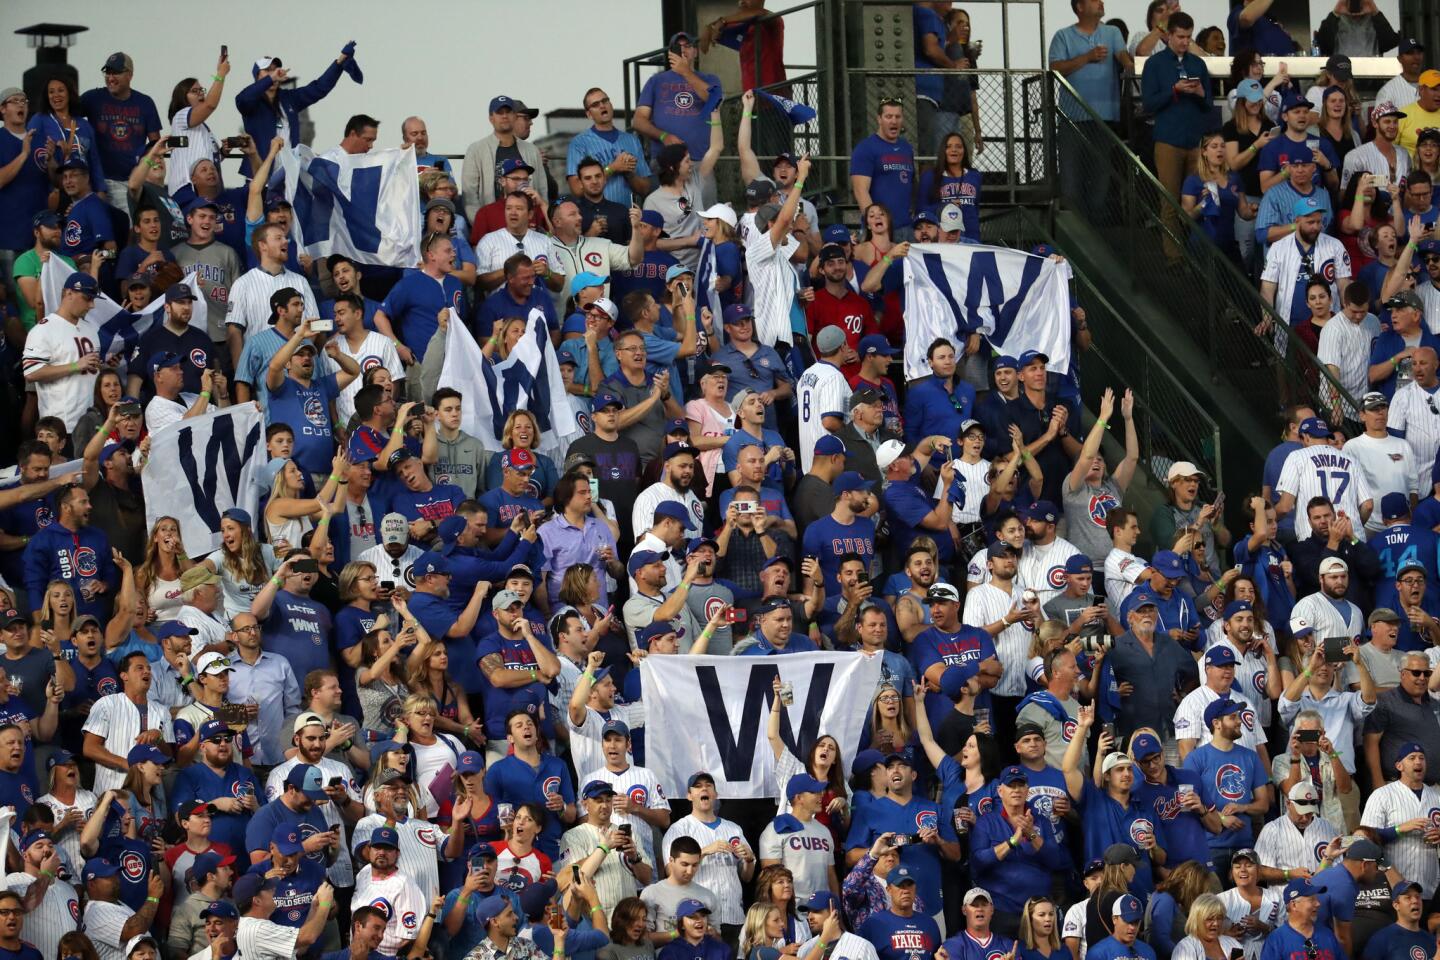 Cubs fans wave the "W" flag after the win.